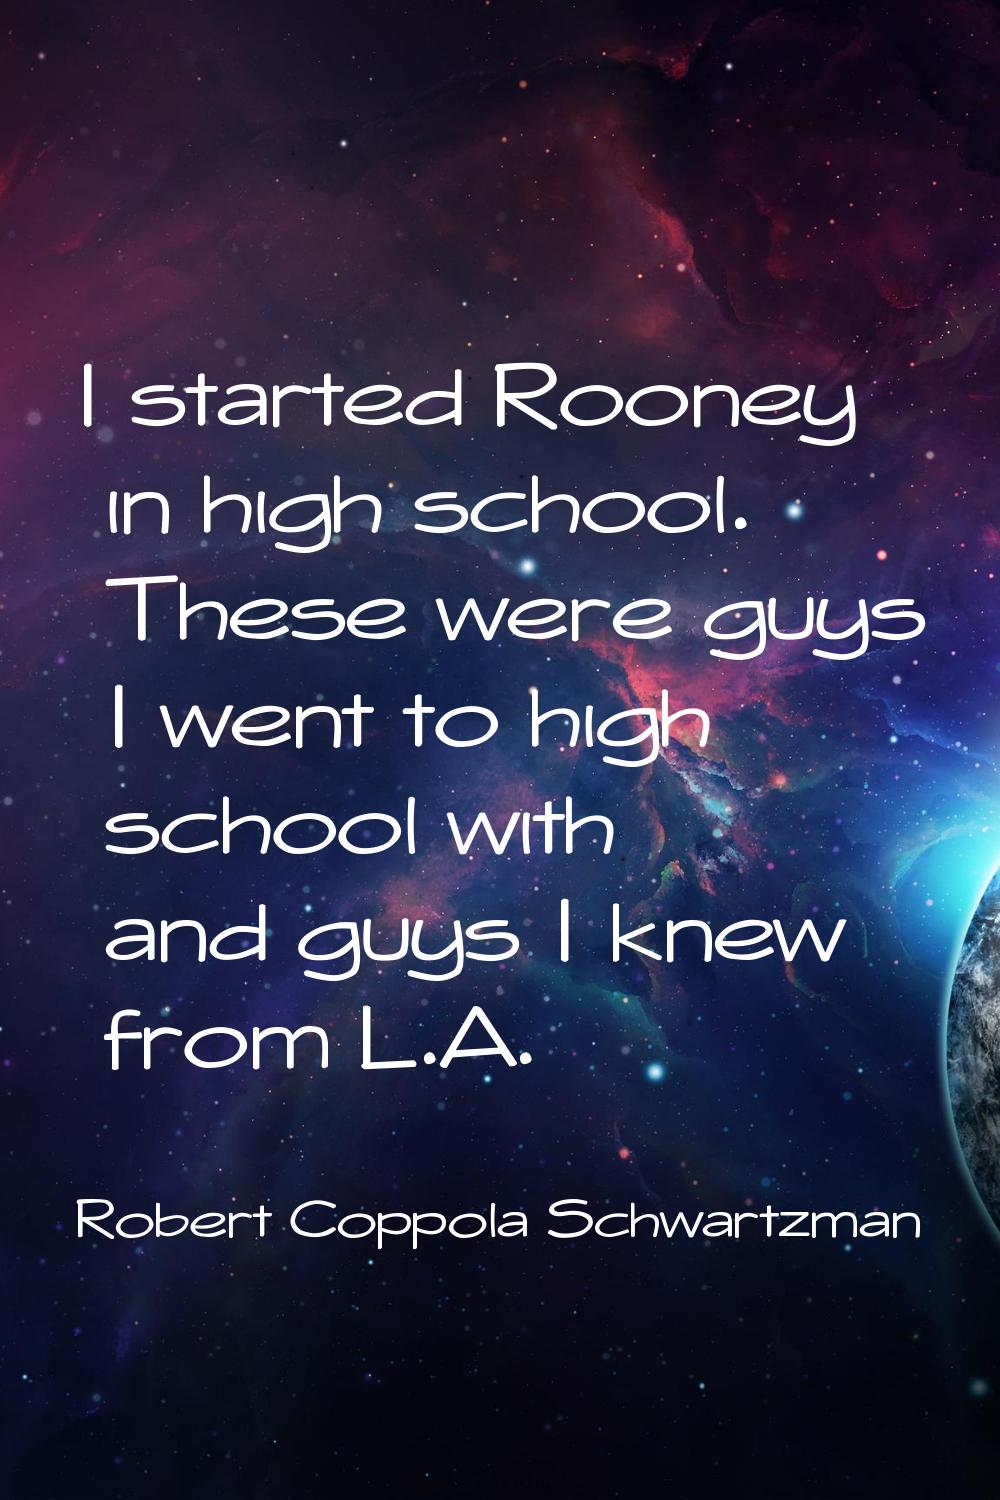 I started Rooney in high school. These were guys I went to high school with and guys I knew from L.